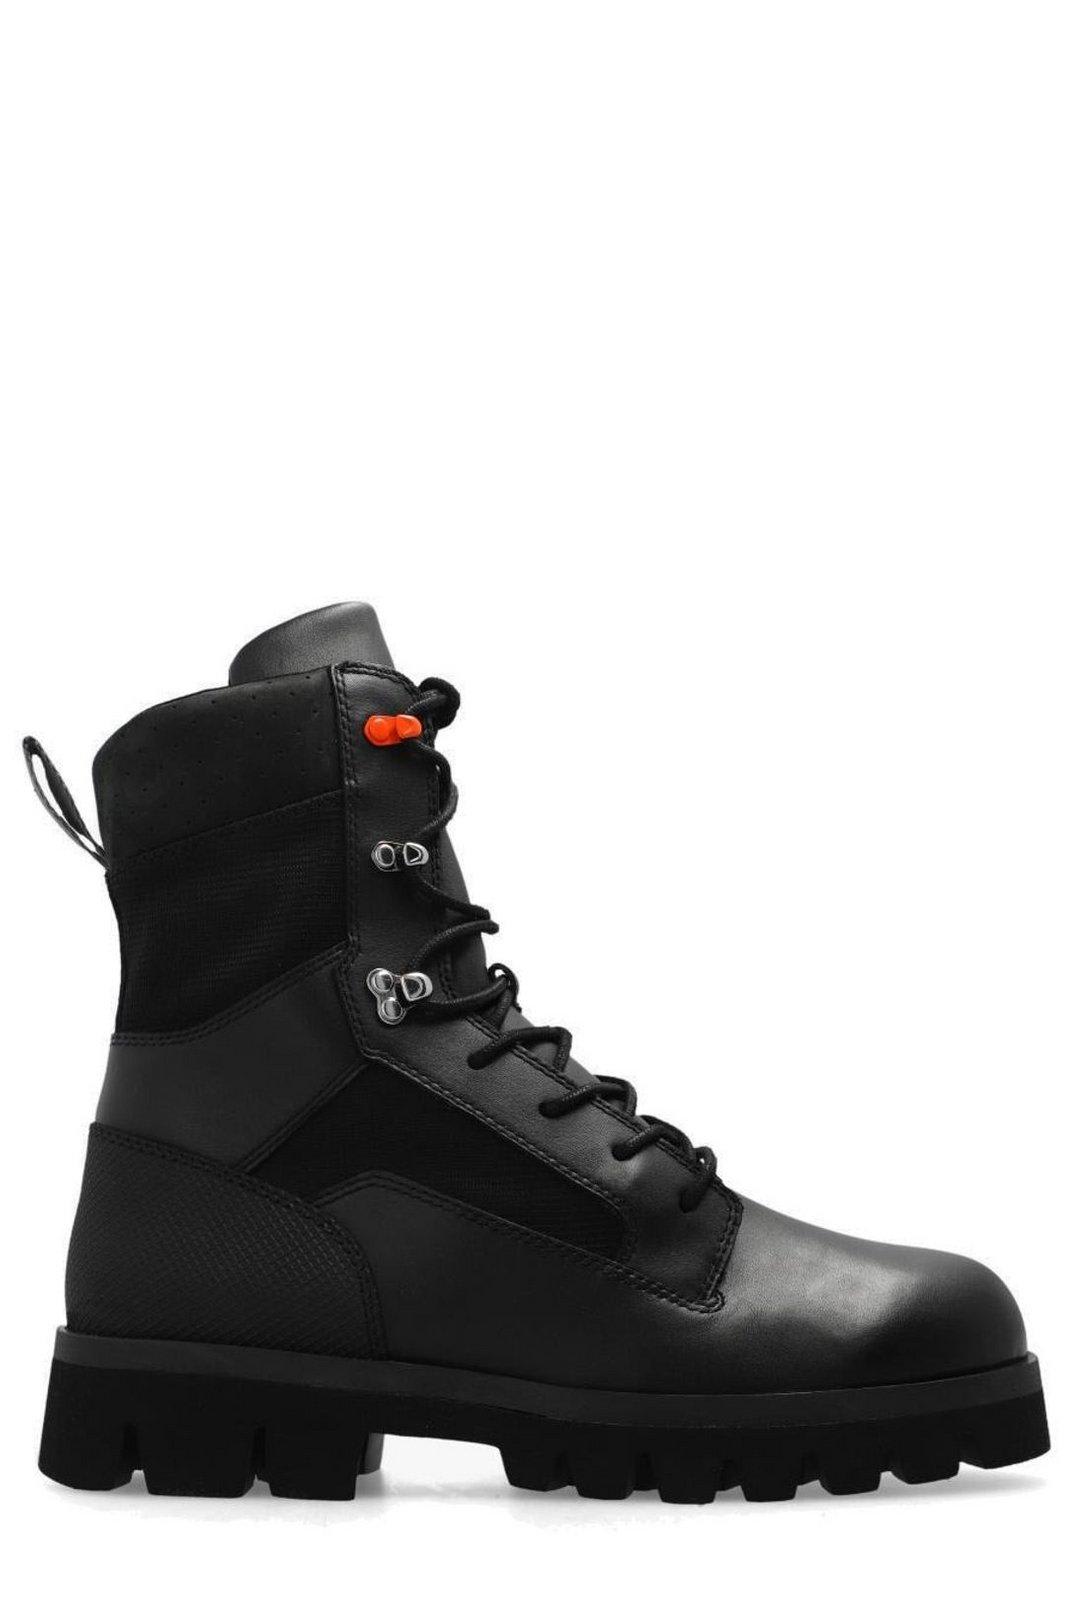 HERON PRESTON Military Lace-up Ankle Boots